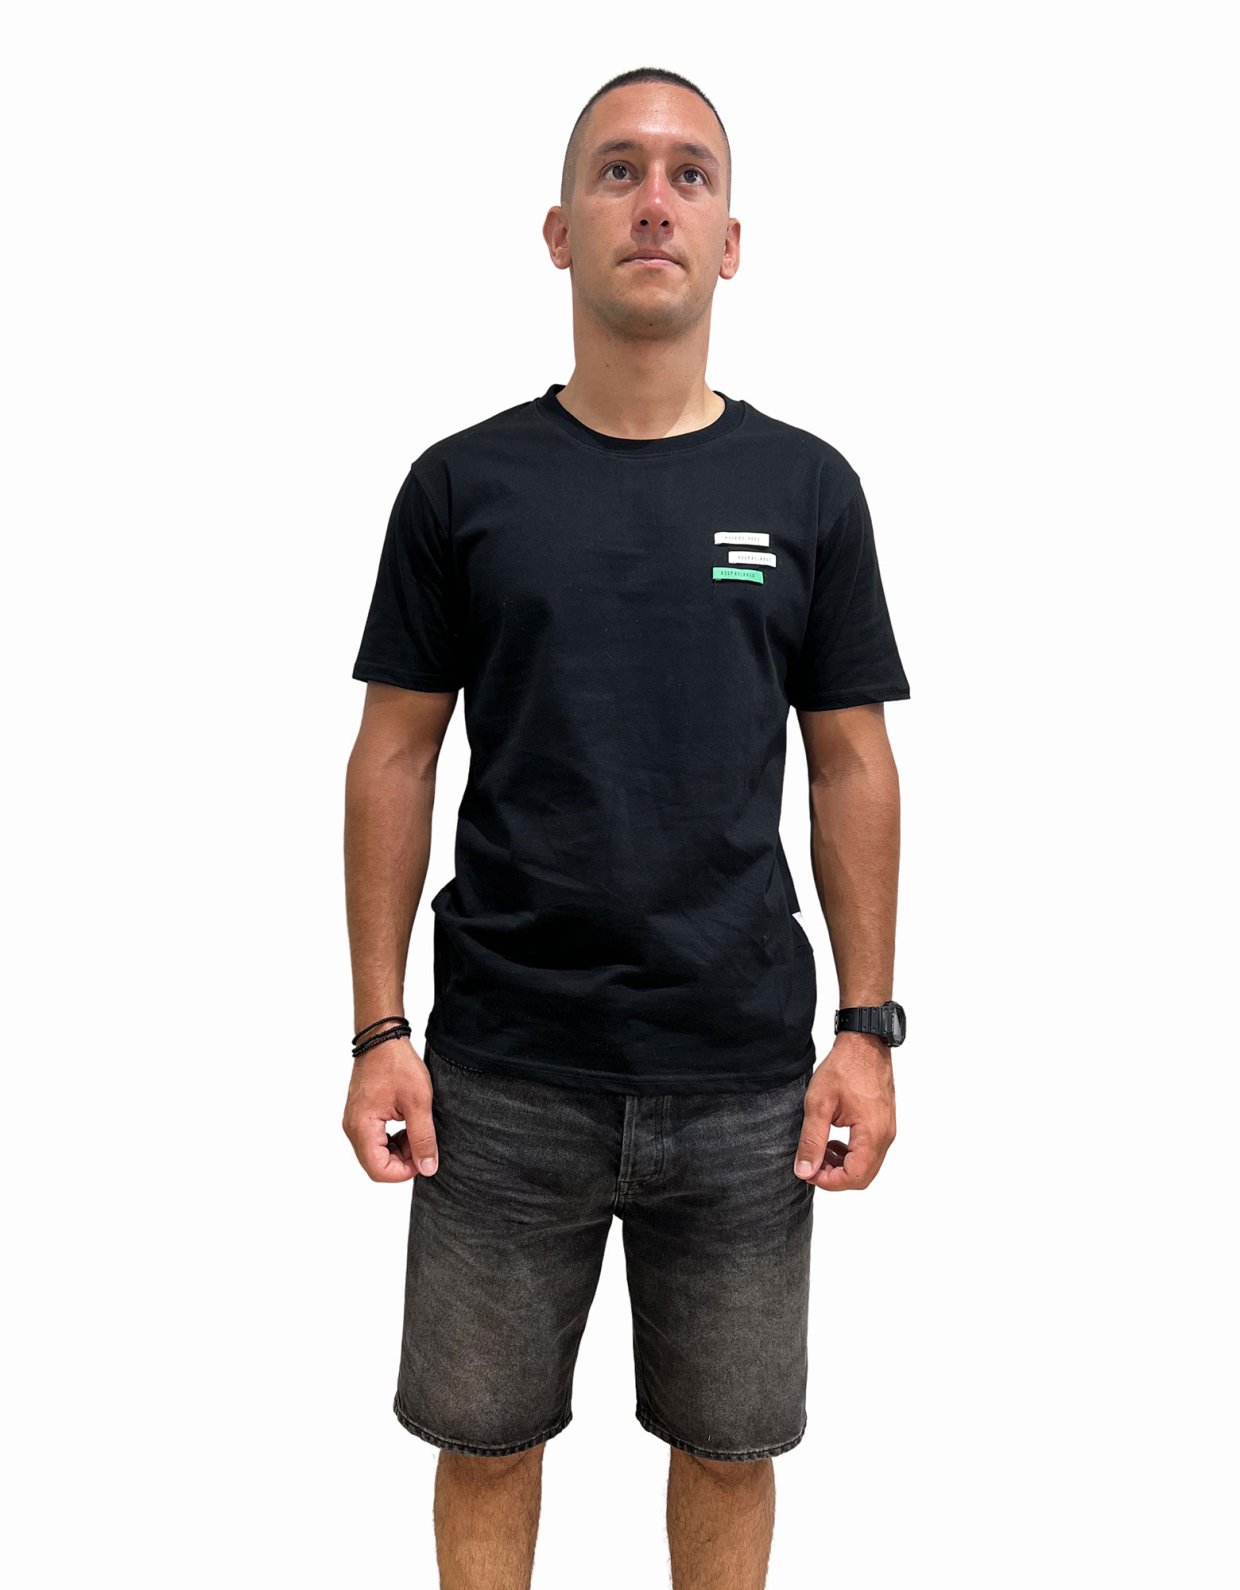 Gianni Lupo Keep relaxed t-shirt black